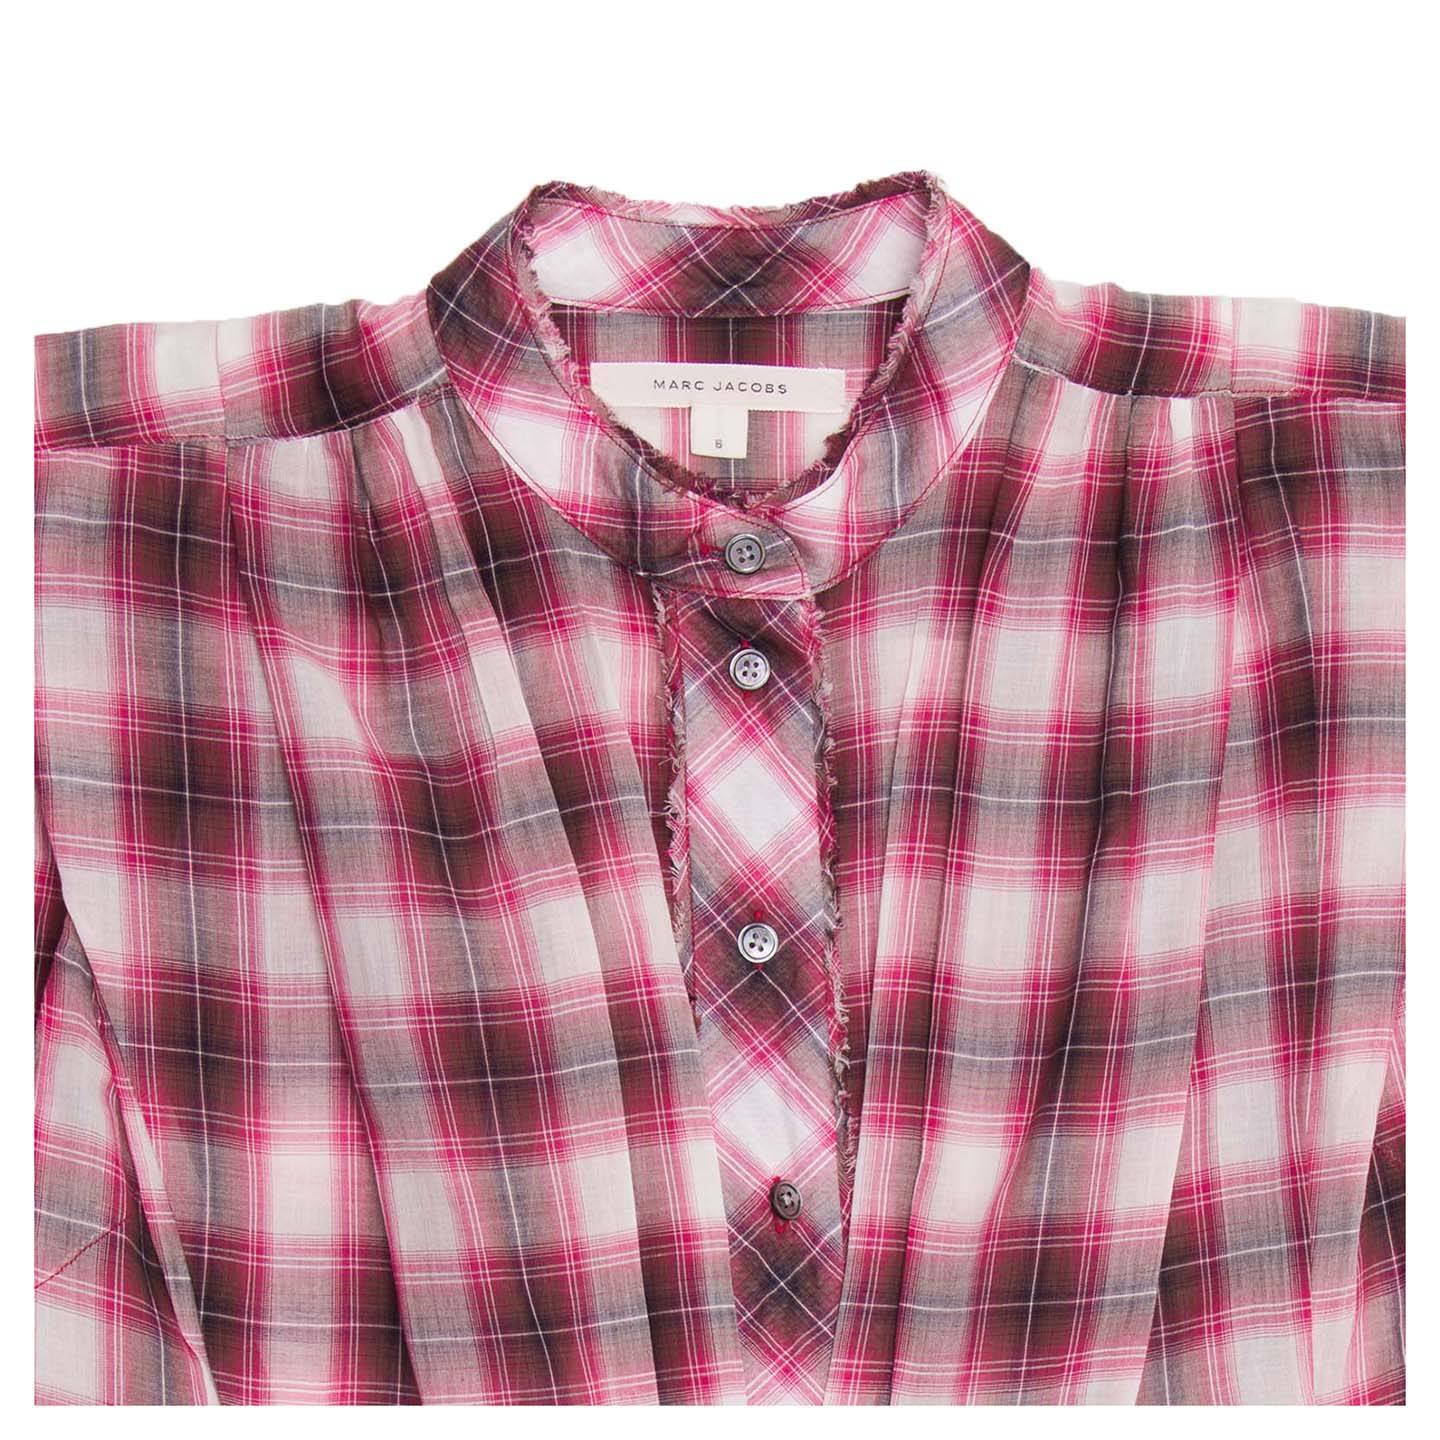 Marc Jacobs Red Plaid Cotton Shirt In New Condition For Sale In Brooklyn, NY